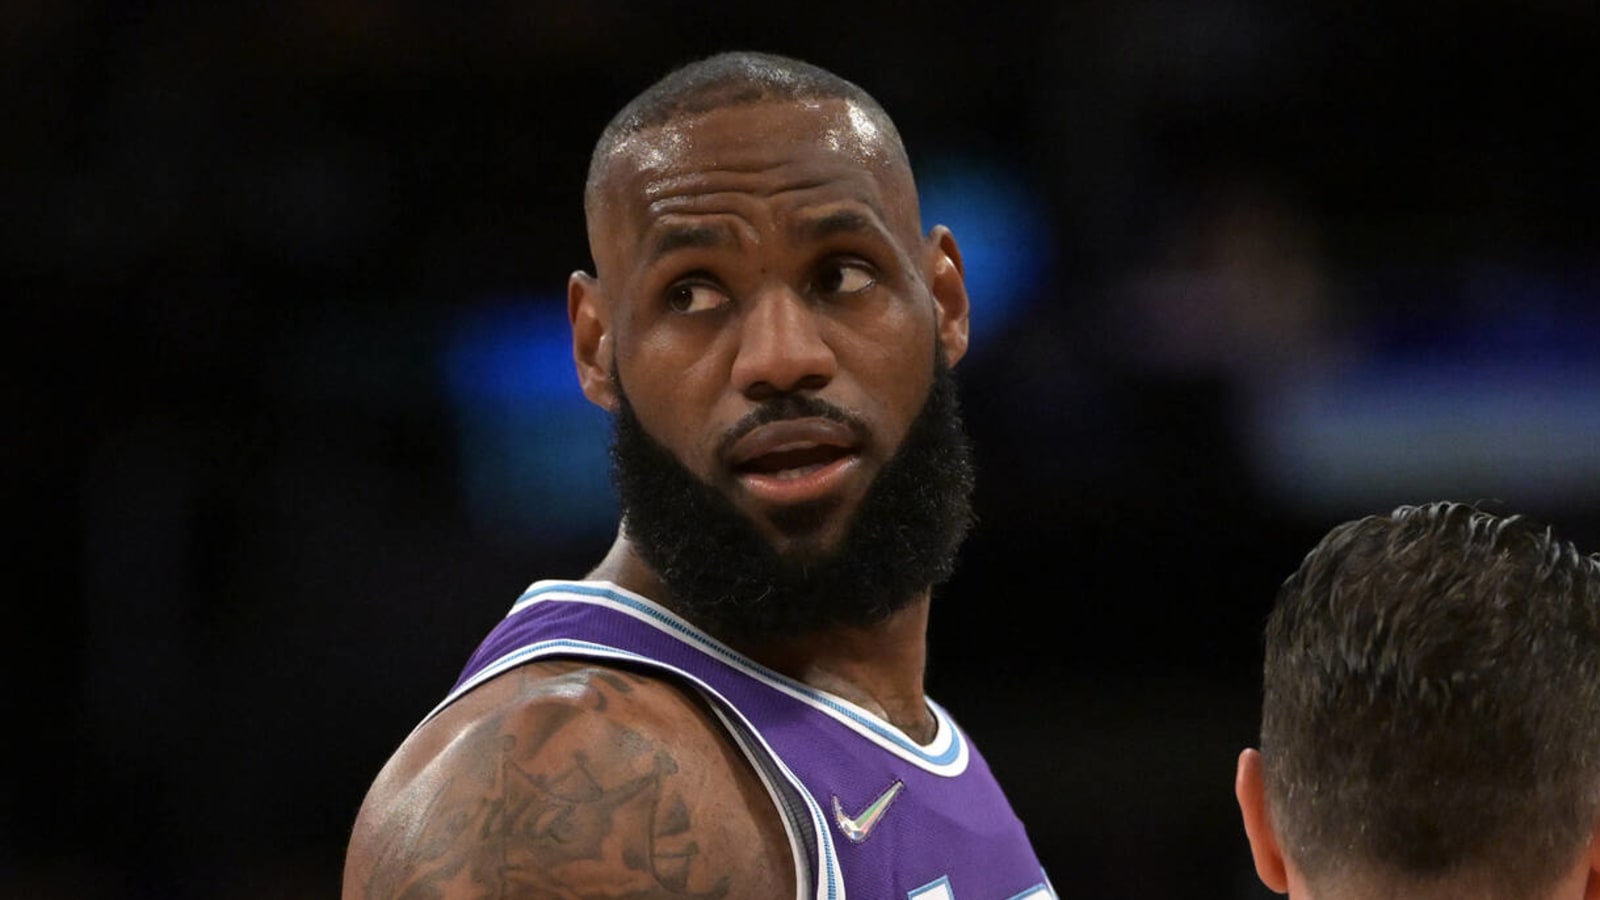 Rumored Lakers hire recently made unflattering LeBron James comments